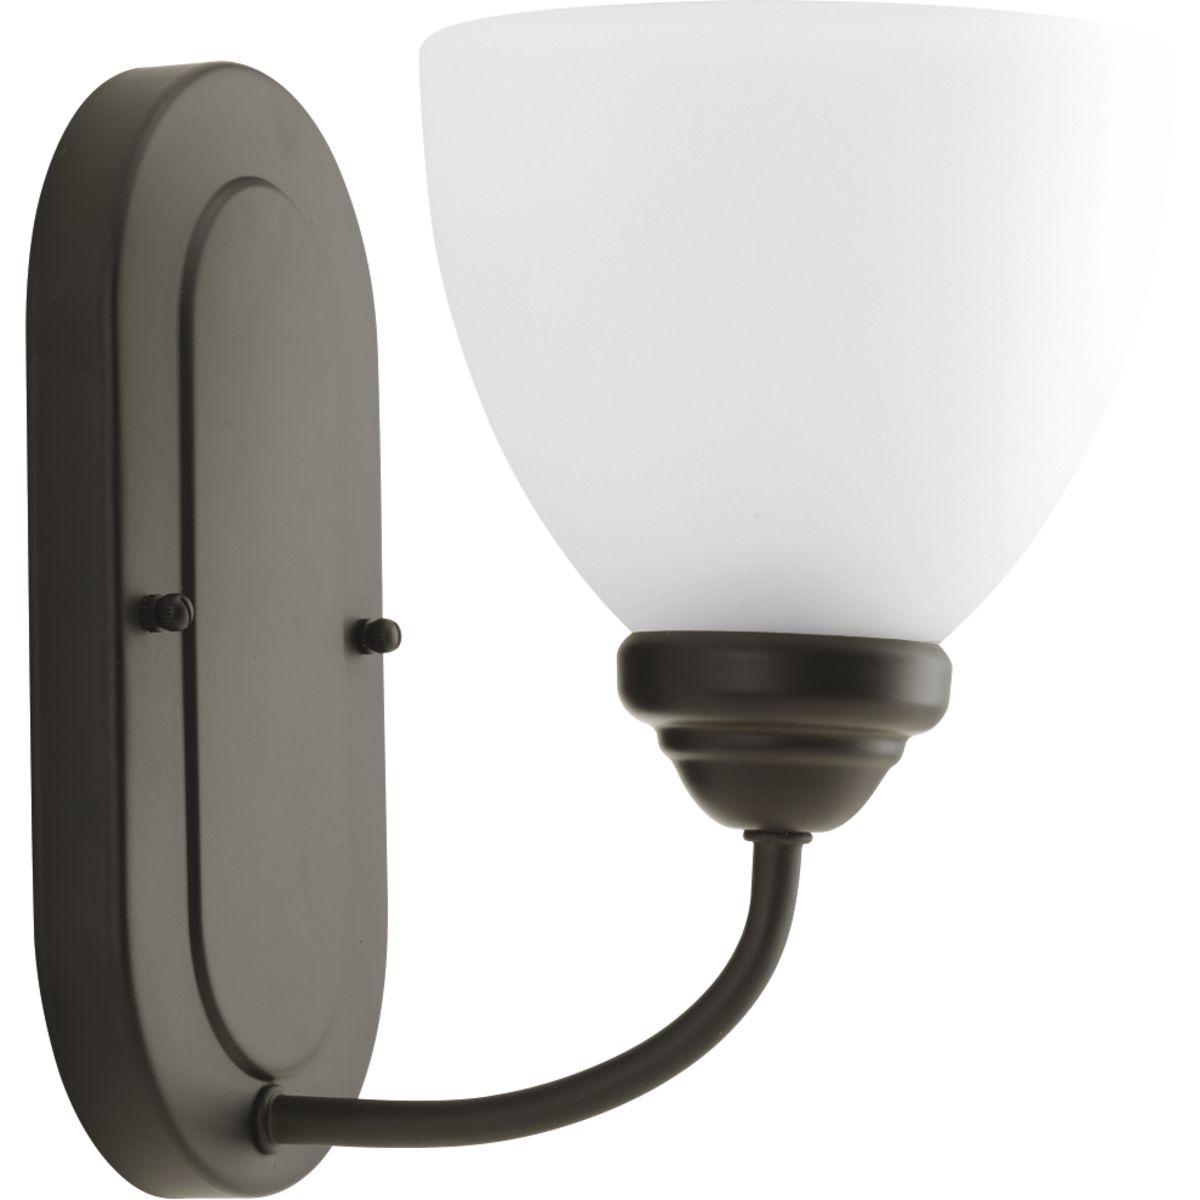 Hubbell P2913-20 The Heart Collection possesses a smart simplicity to complement today's home. This one-light bath bracket includes etched glass shades to add distinction and provide pleasing illumination to any room. Versatile design permits installation of fixture facin